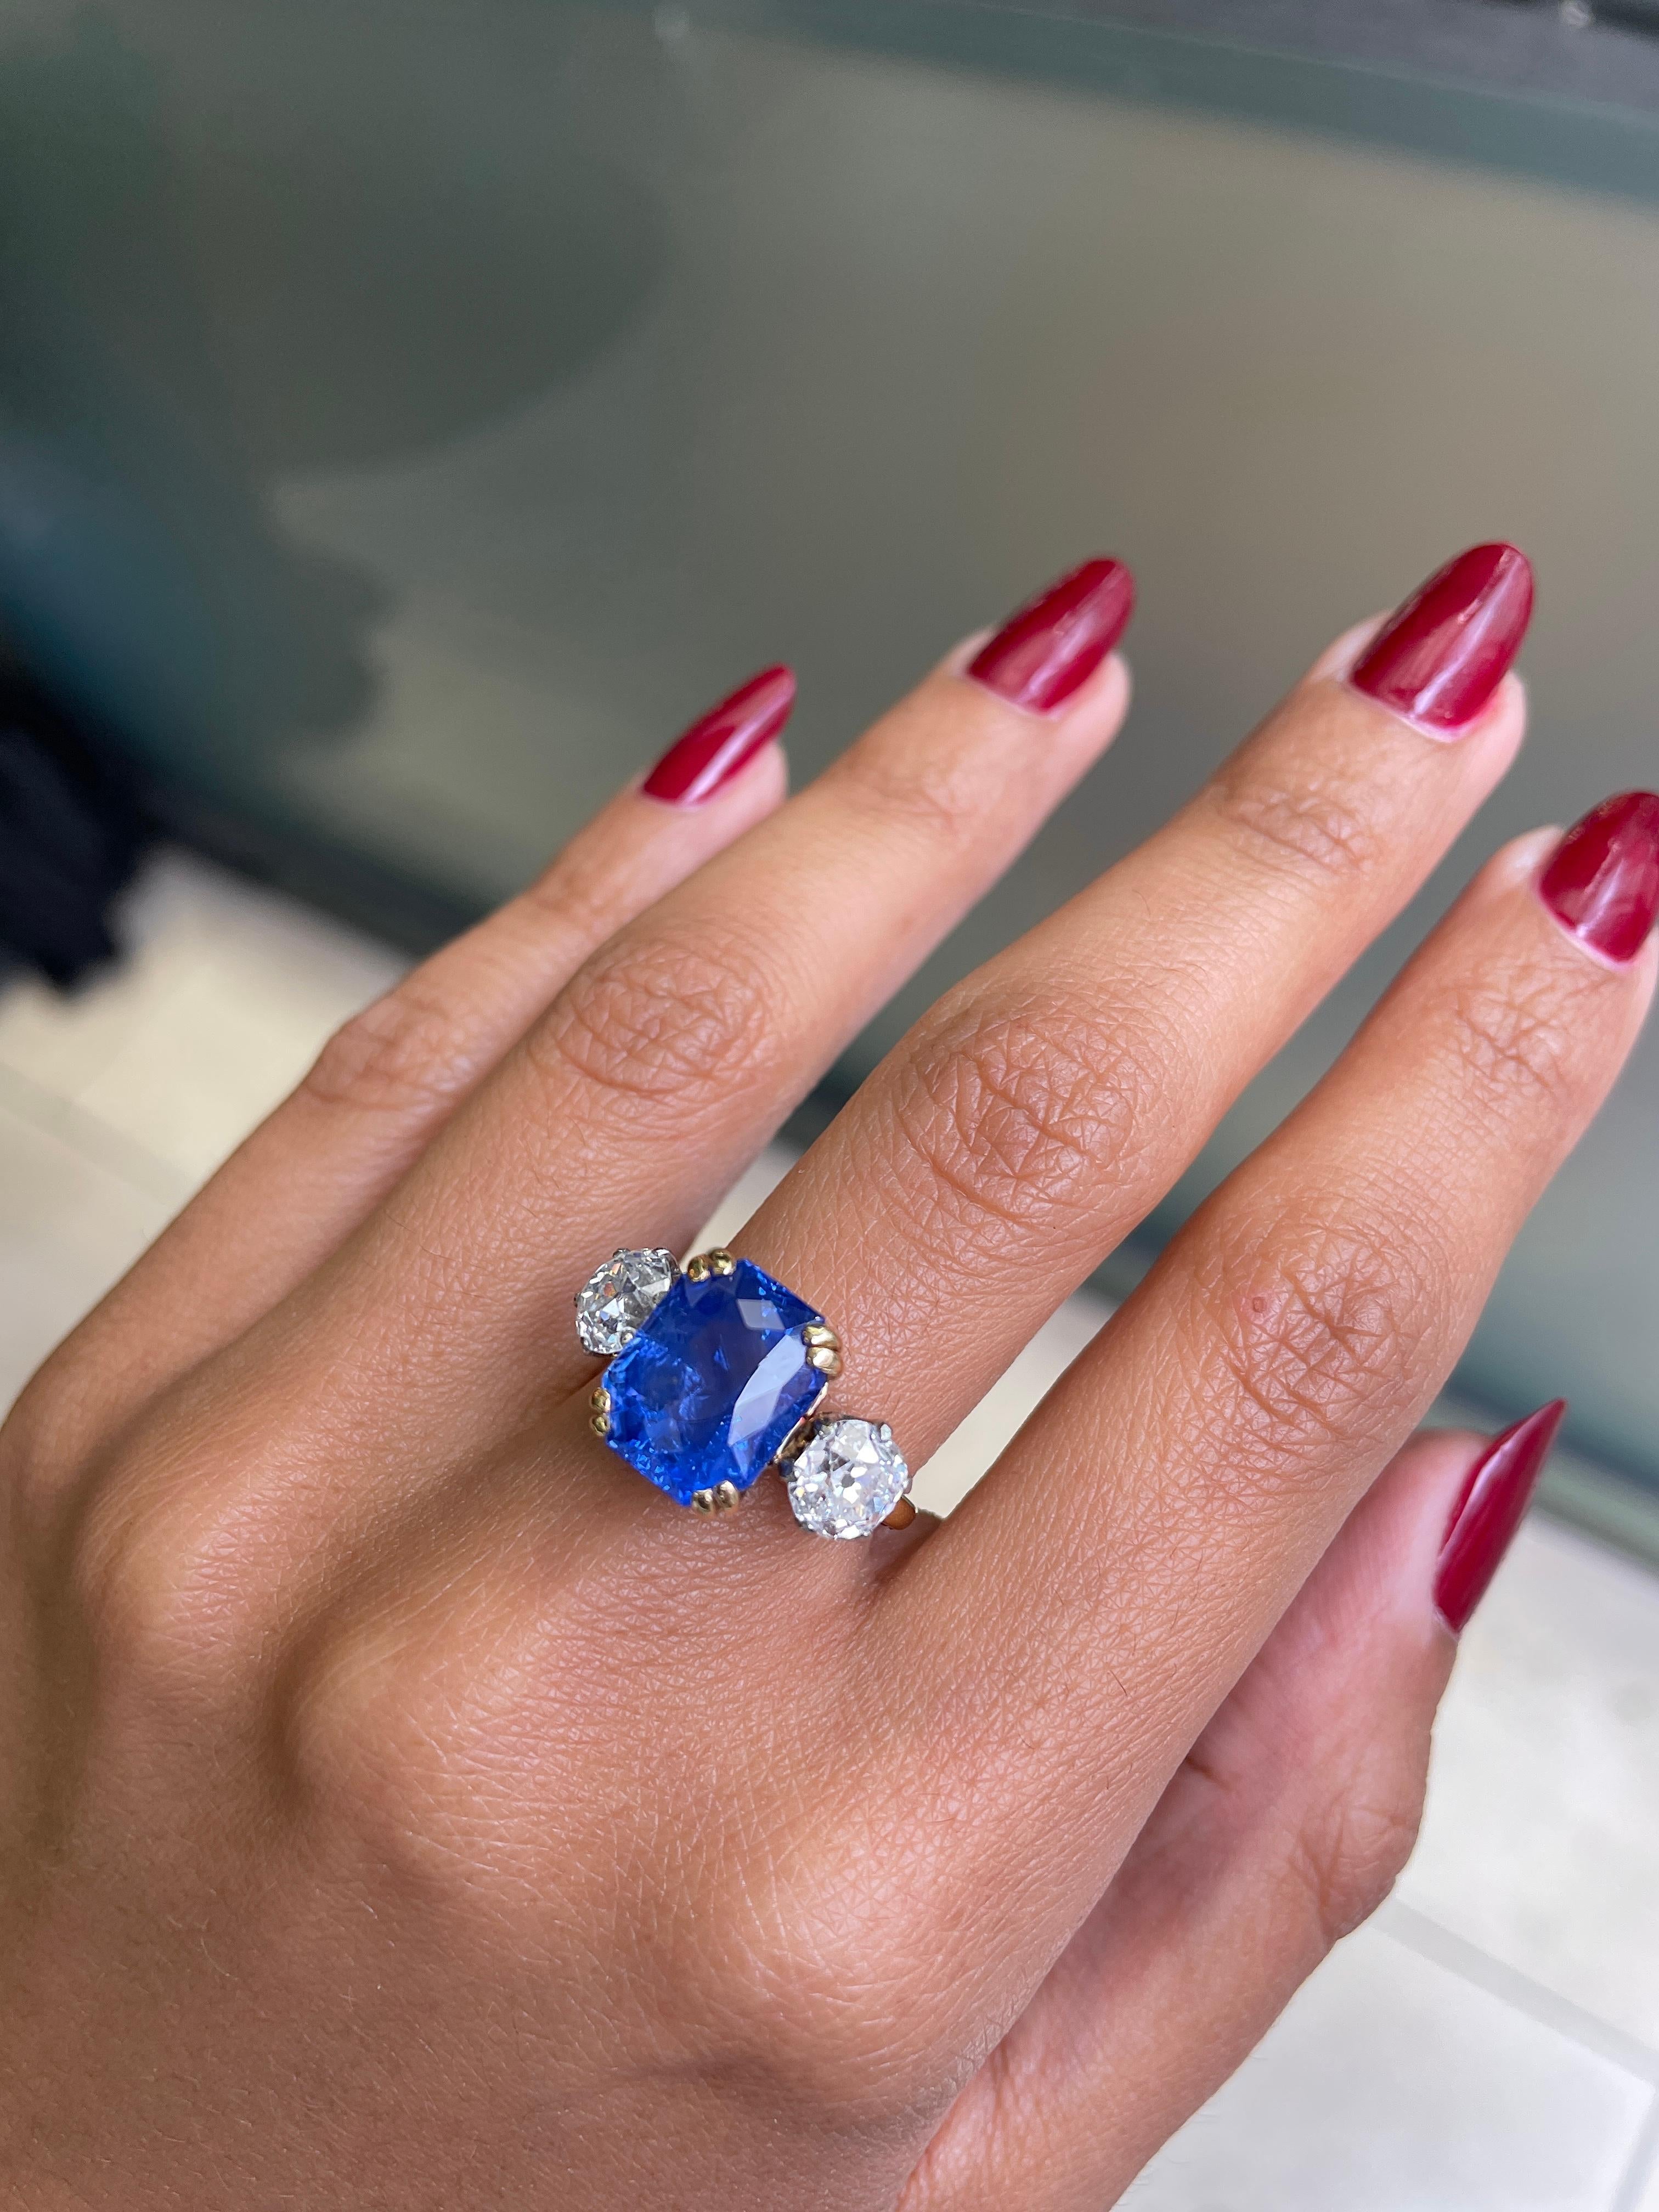 Old Mine Cut 7.29 Carat Natural Unheated Sapphire and Old Cut Diamond Three-Stone Ring For Sale